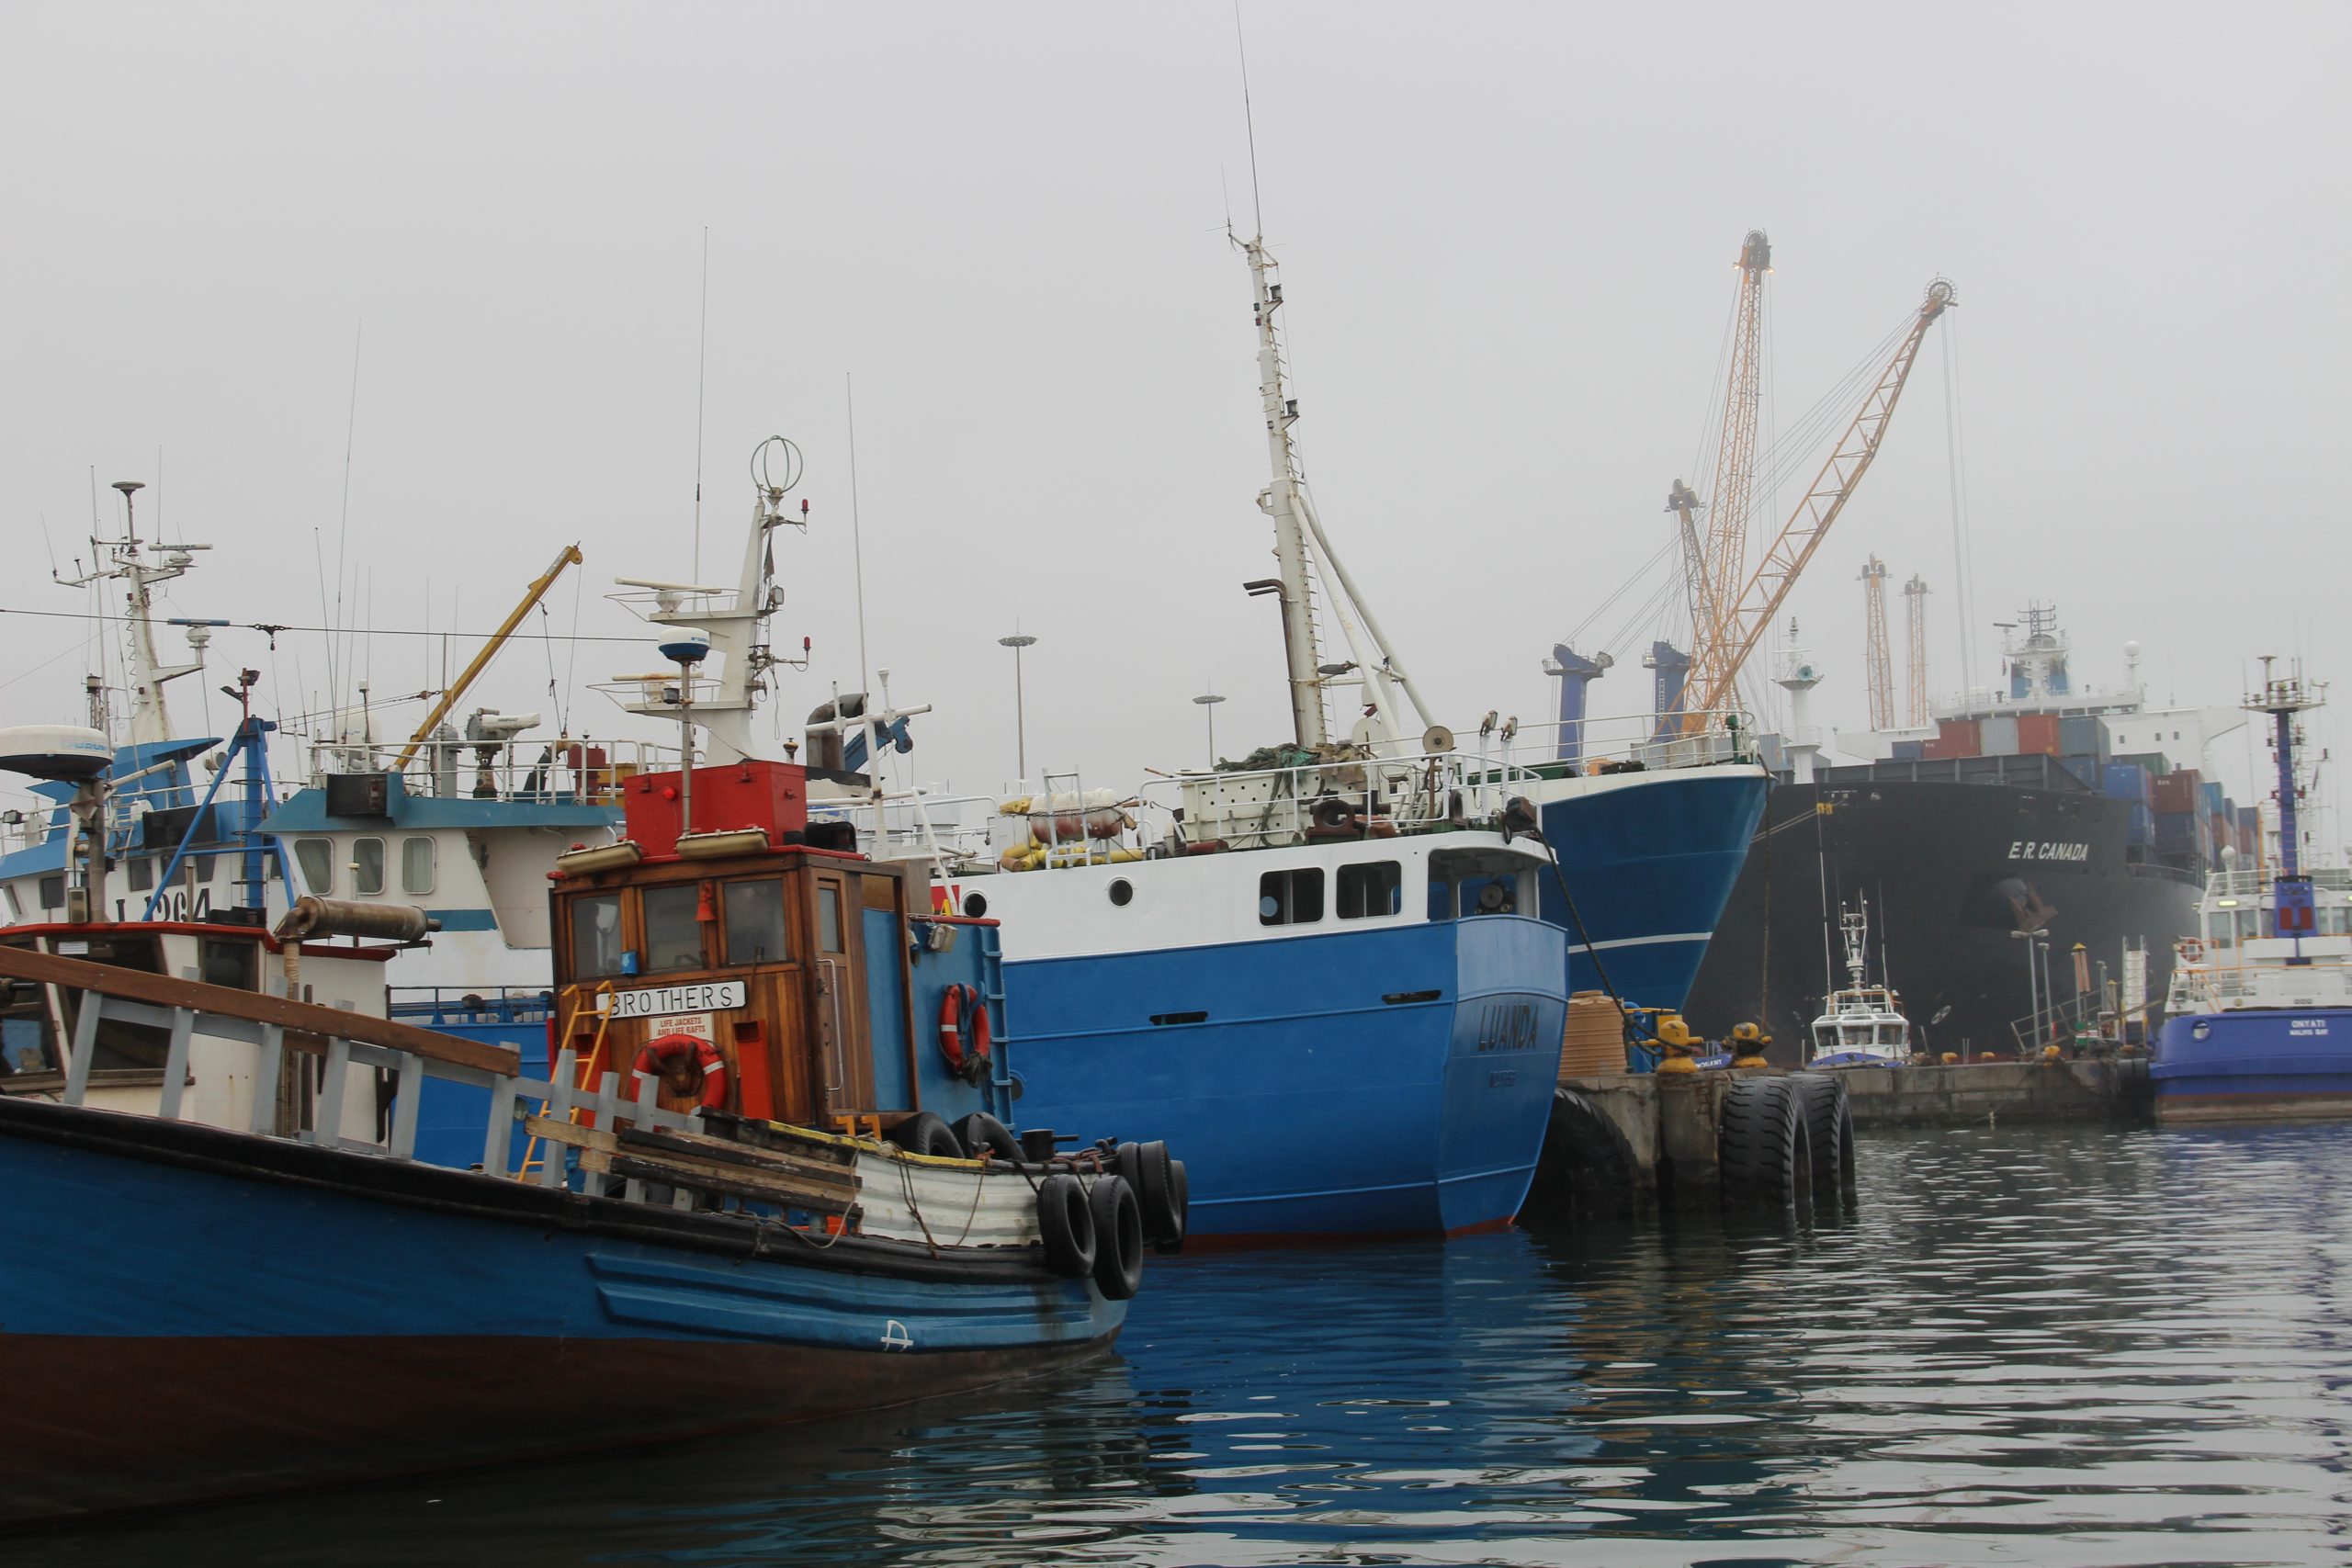 Strengthening the Fisheries through the Application of ERA (LMR/2016/01)